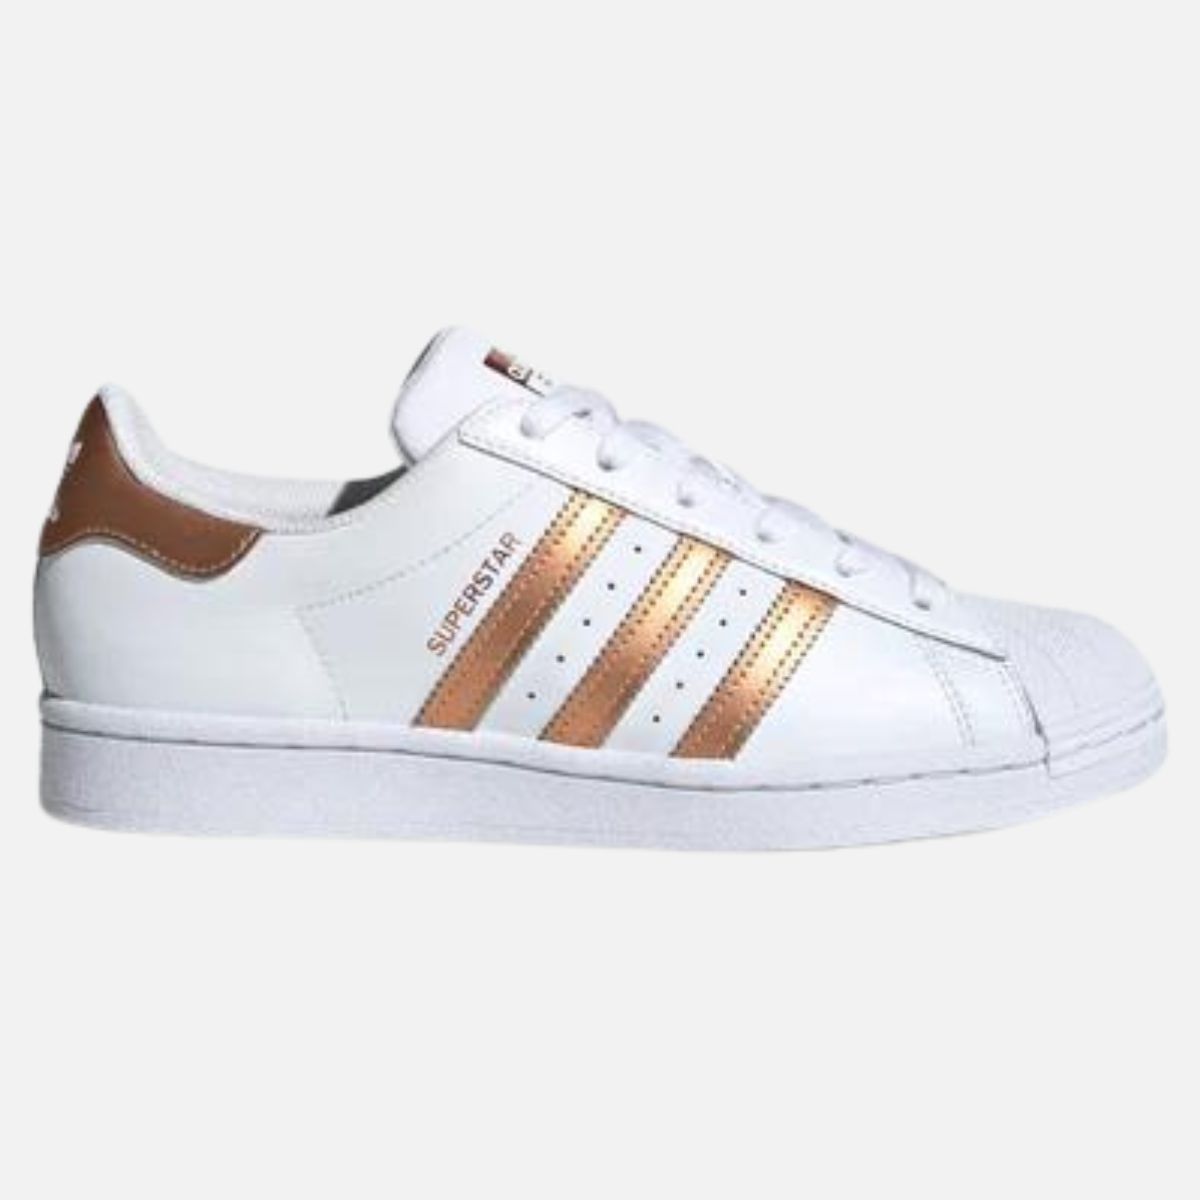 Adidas Superstar Womens Casual Shoes -White